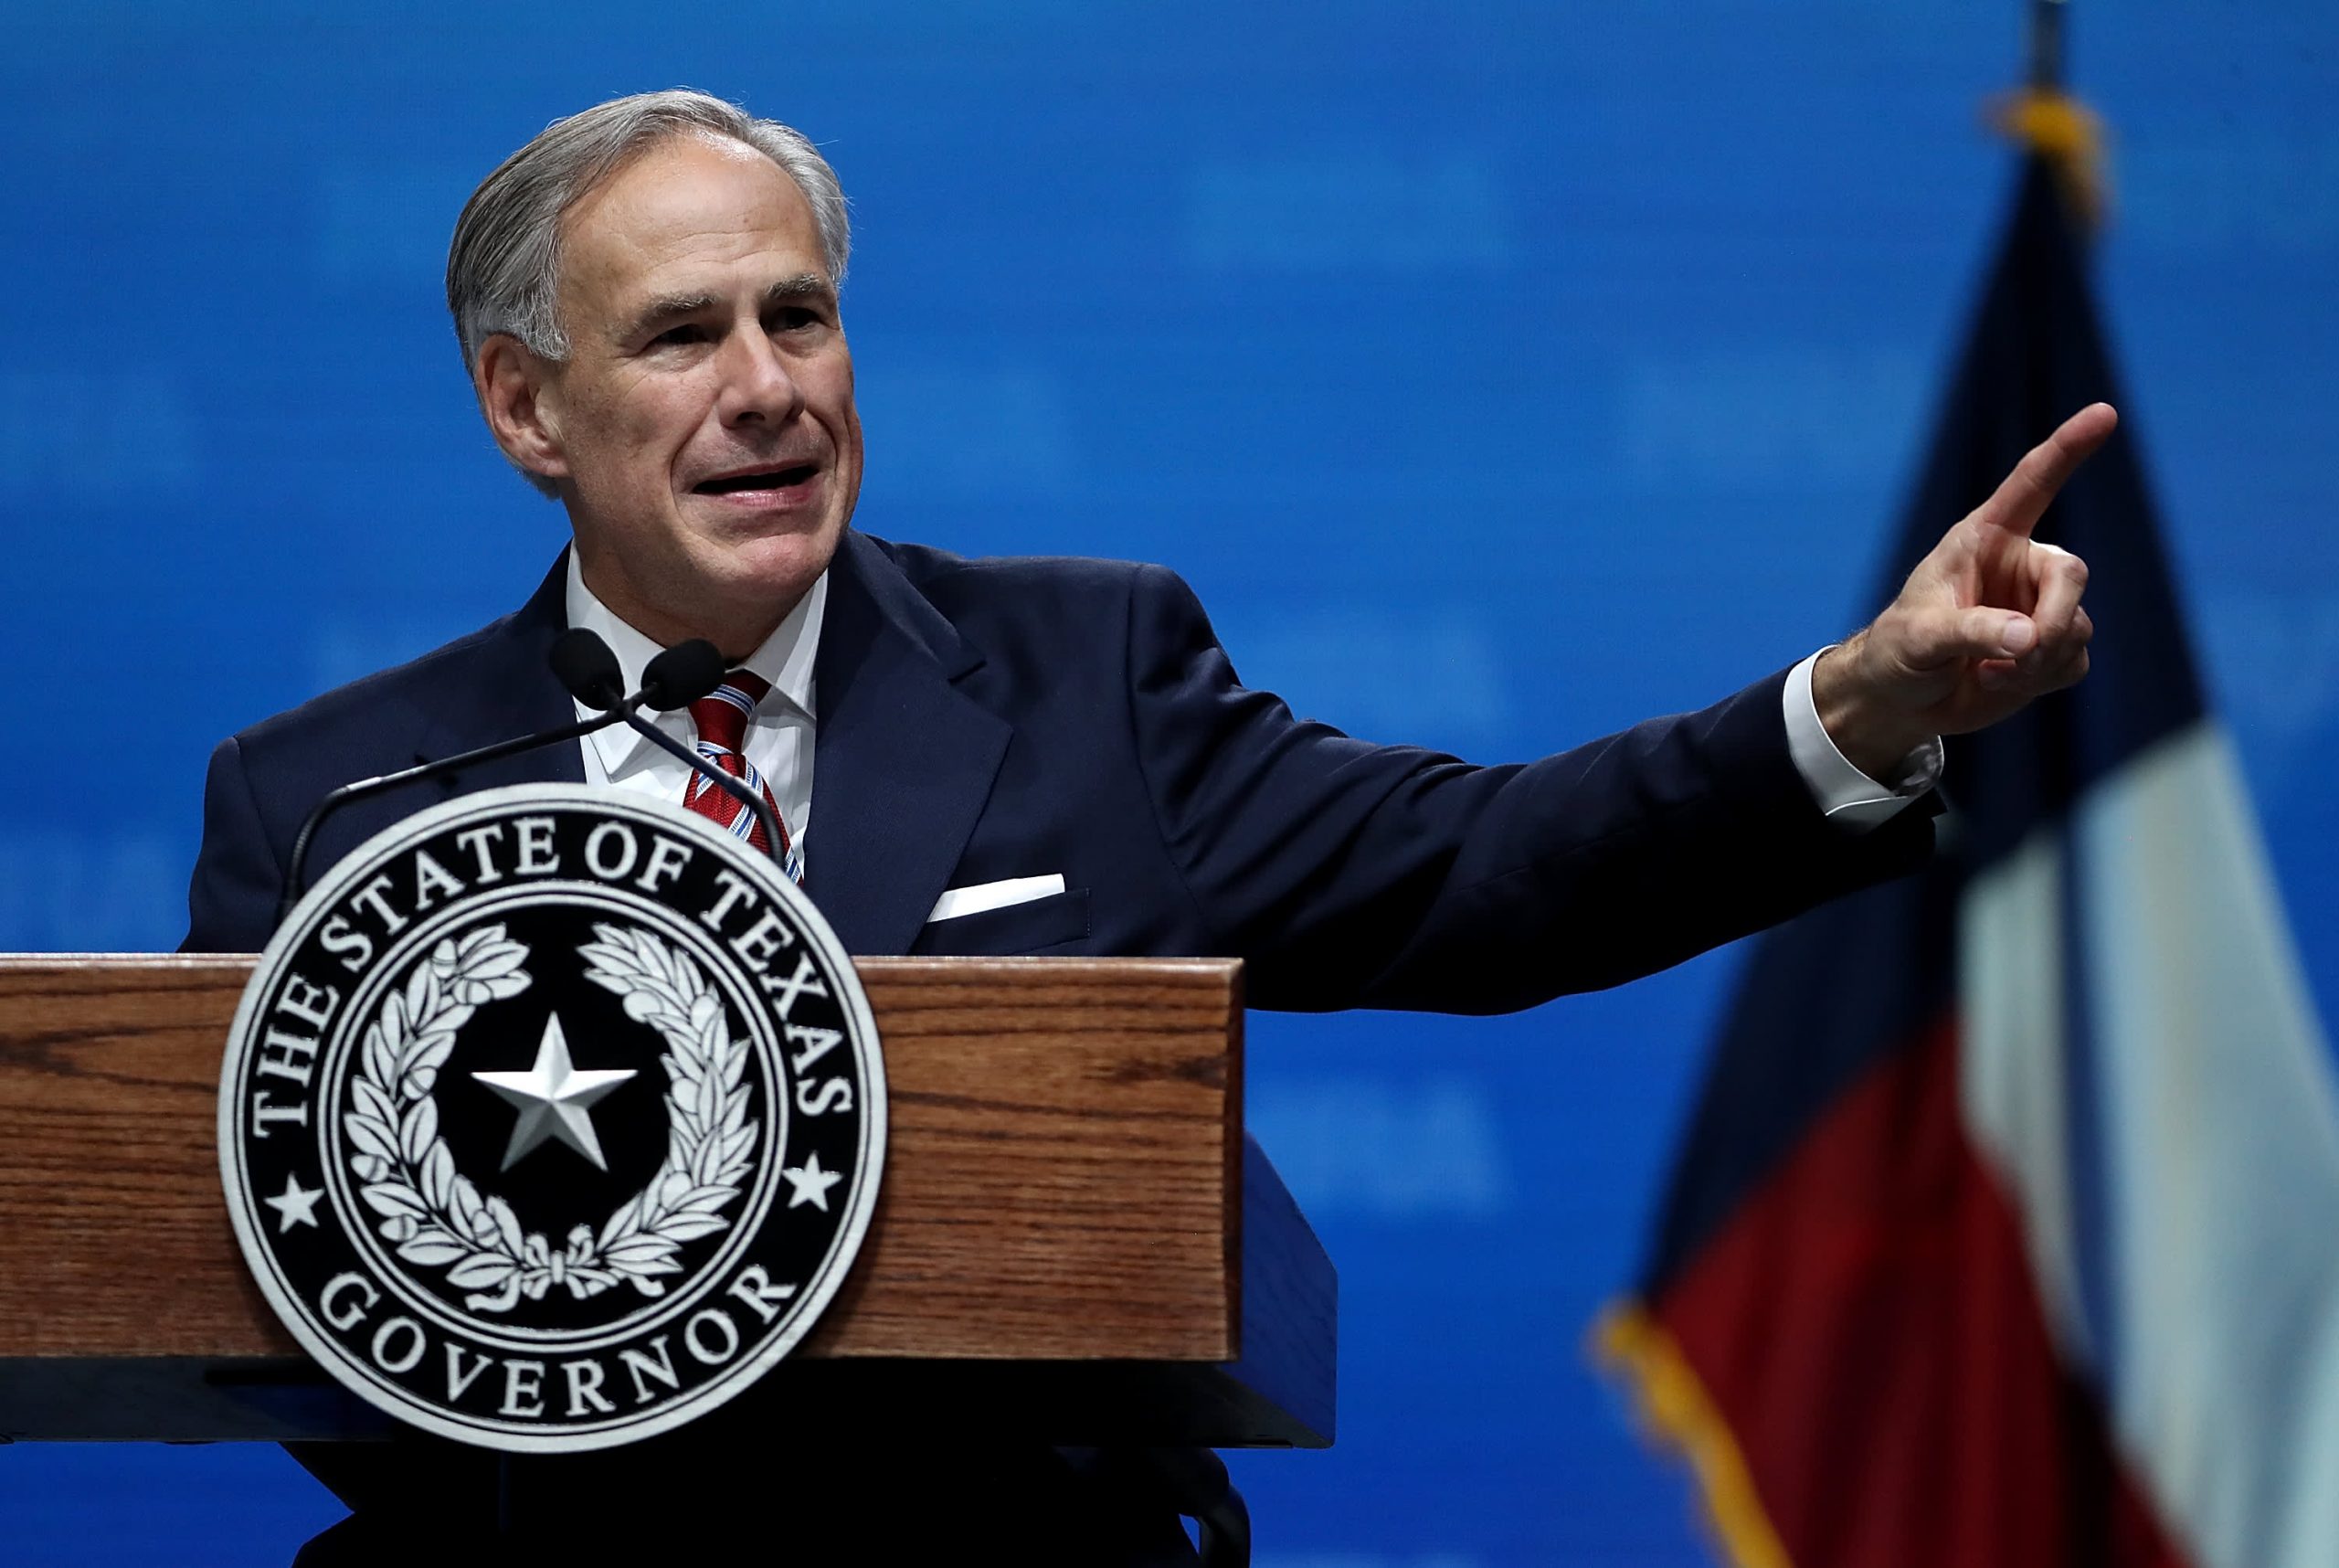 Texas governor says companies moving headquarters to the state has turned into a 'tidal wave'